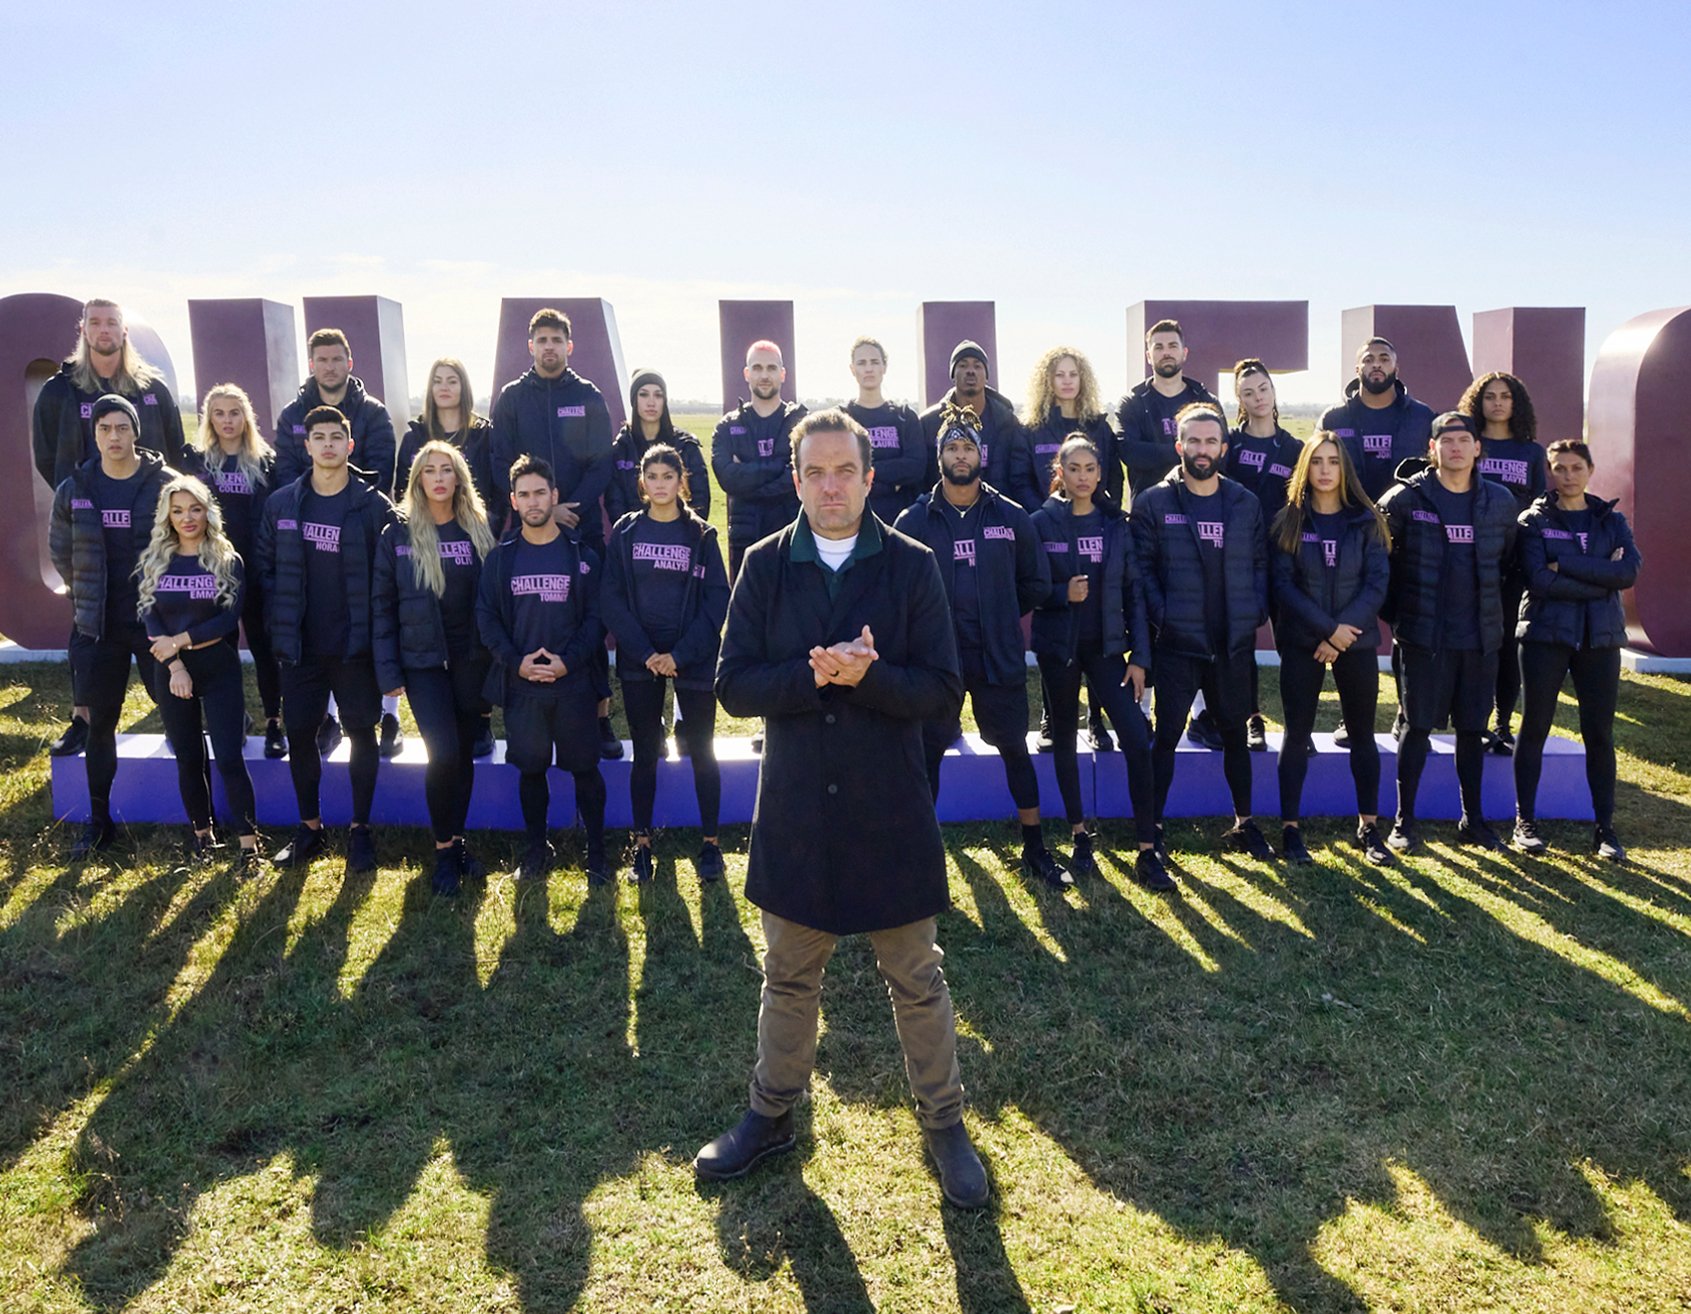 'The Challenge' Season 38 cast in uniforms standing behind T.J. Lavin on a field.